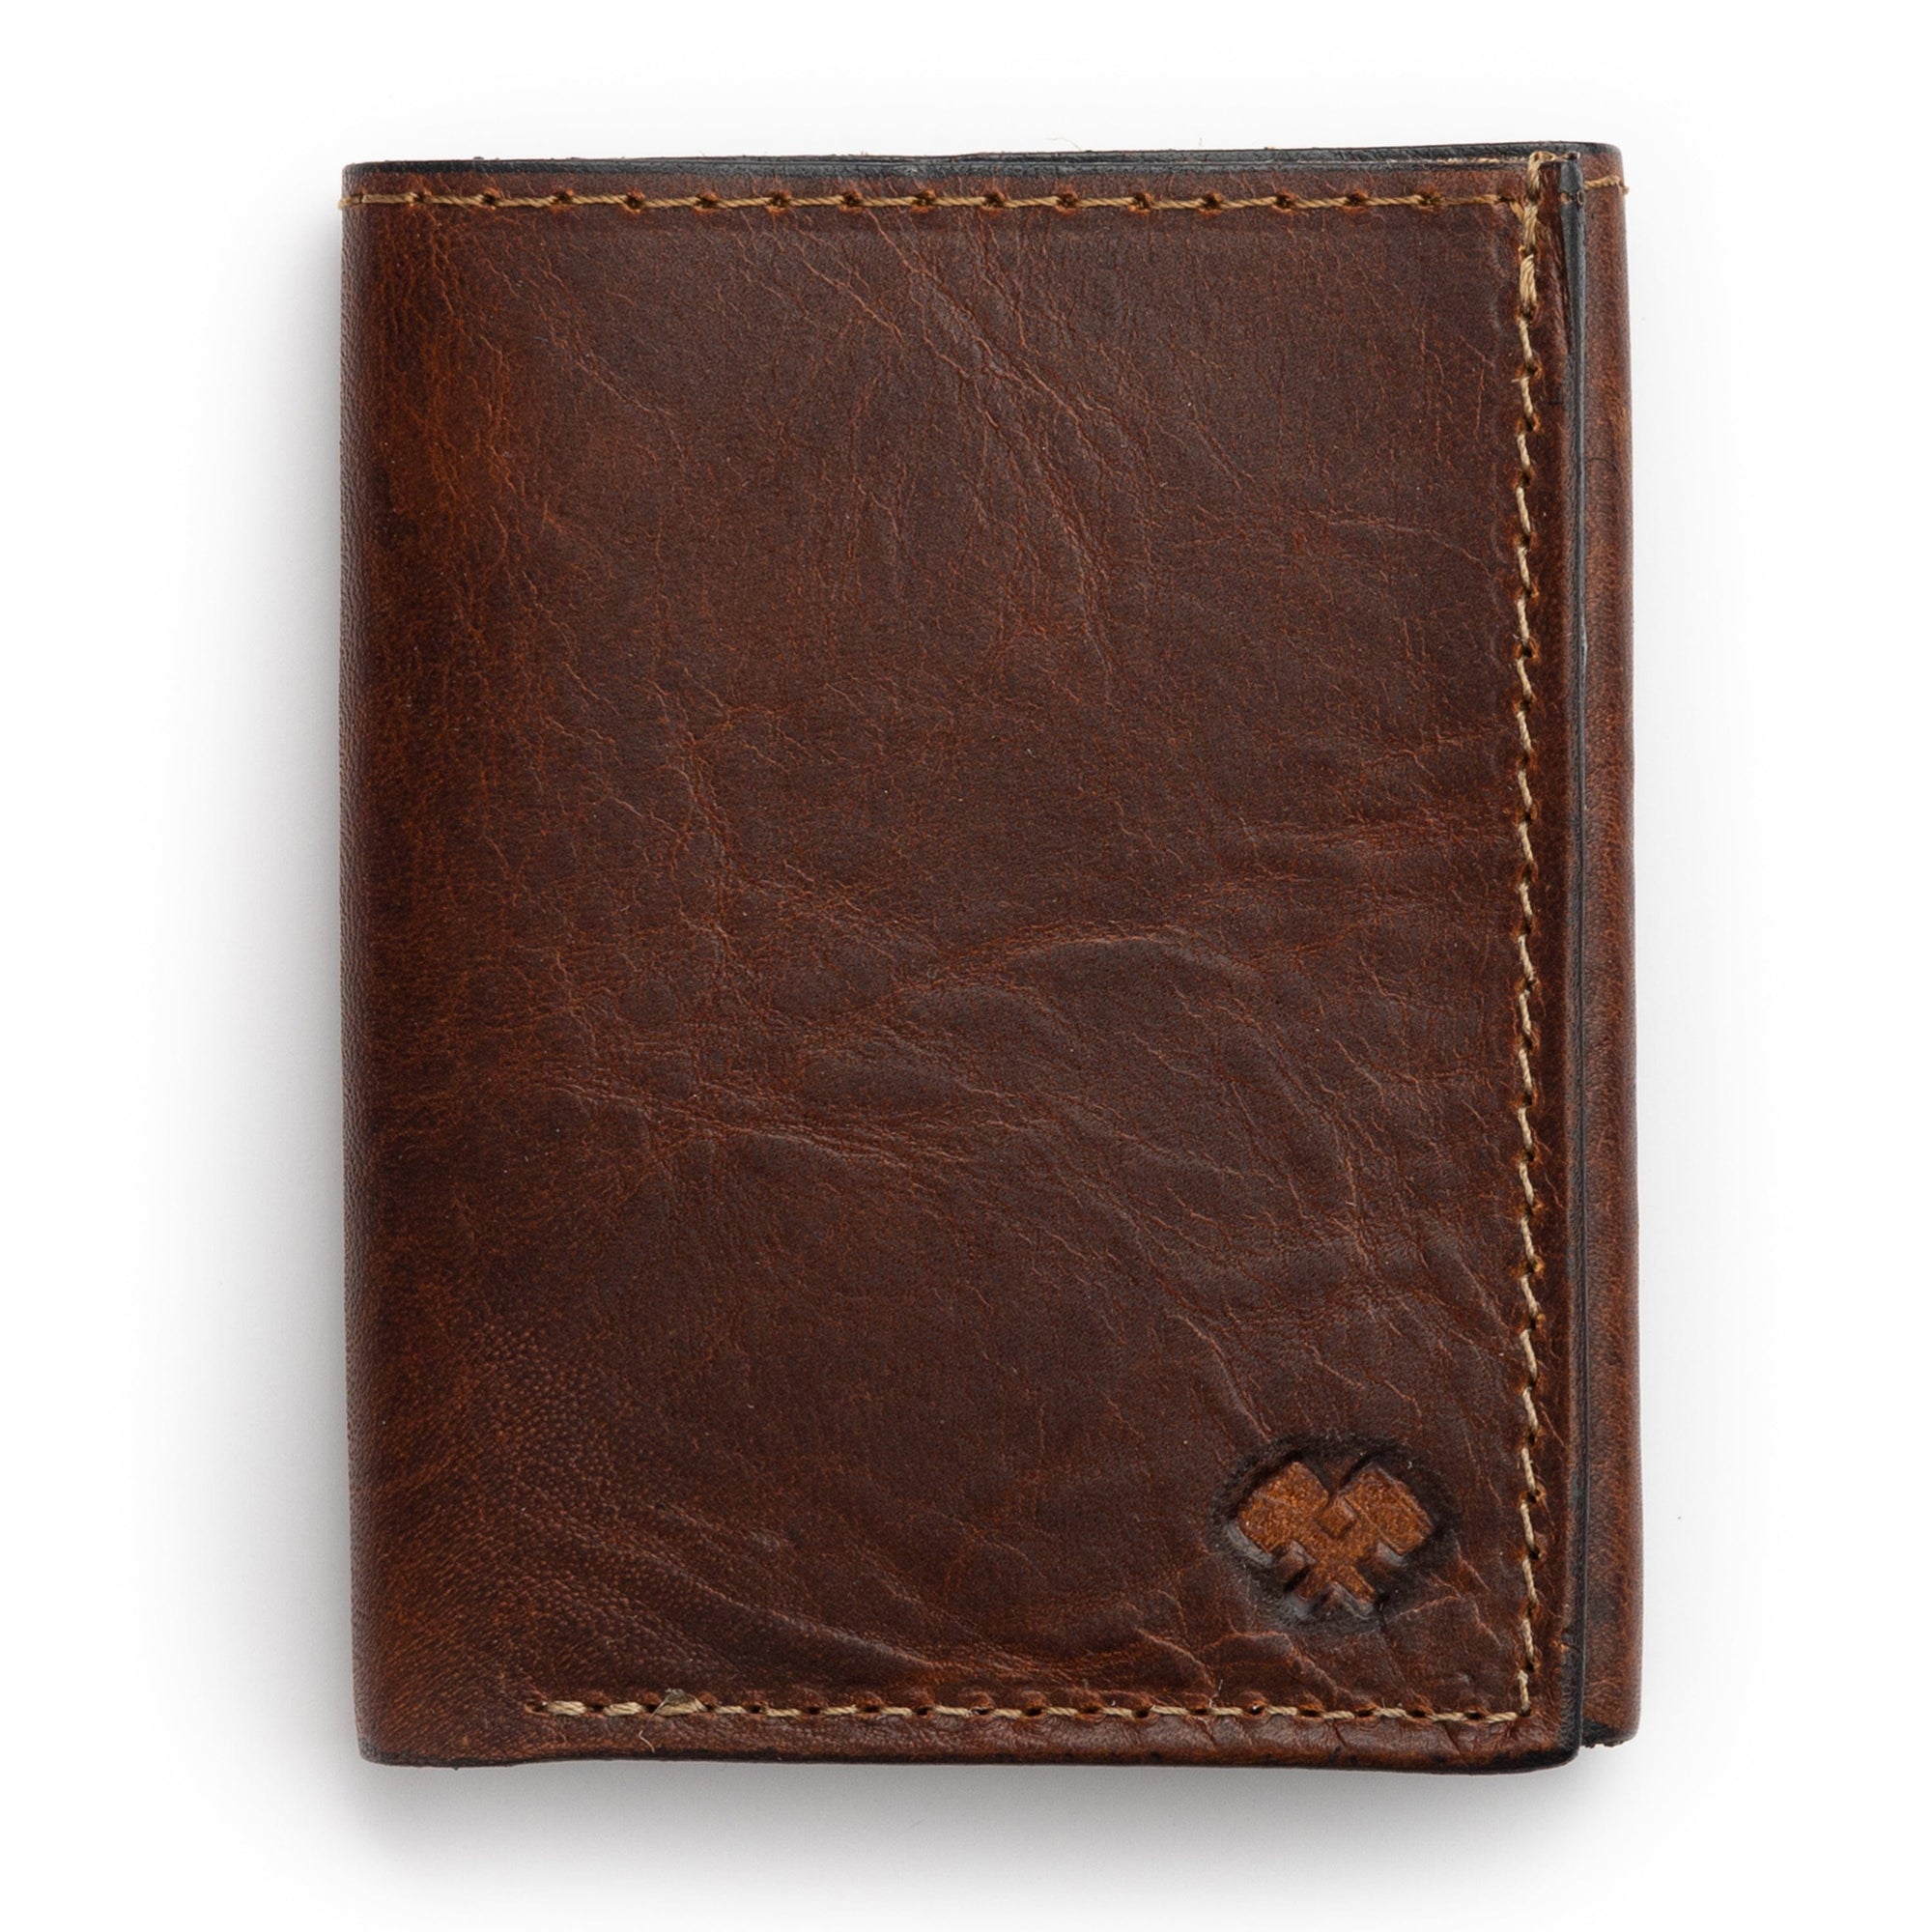 Trifold Mens Wallet, Men's Leather Trifold Wallet Made with